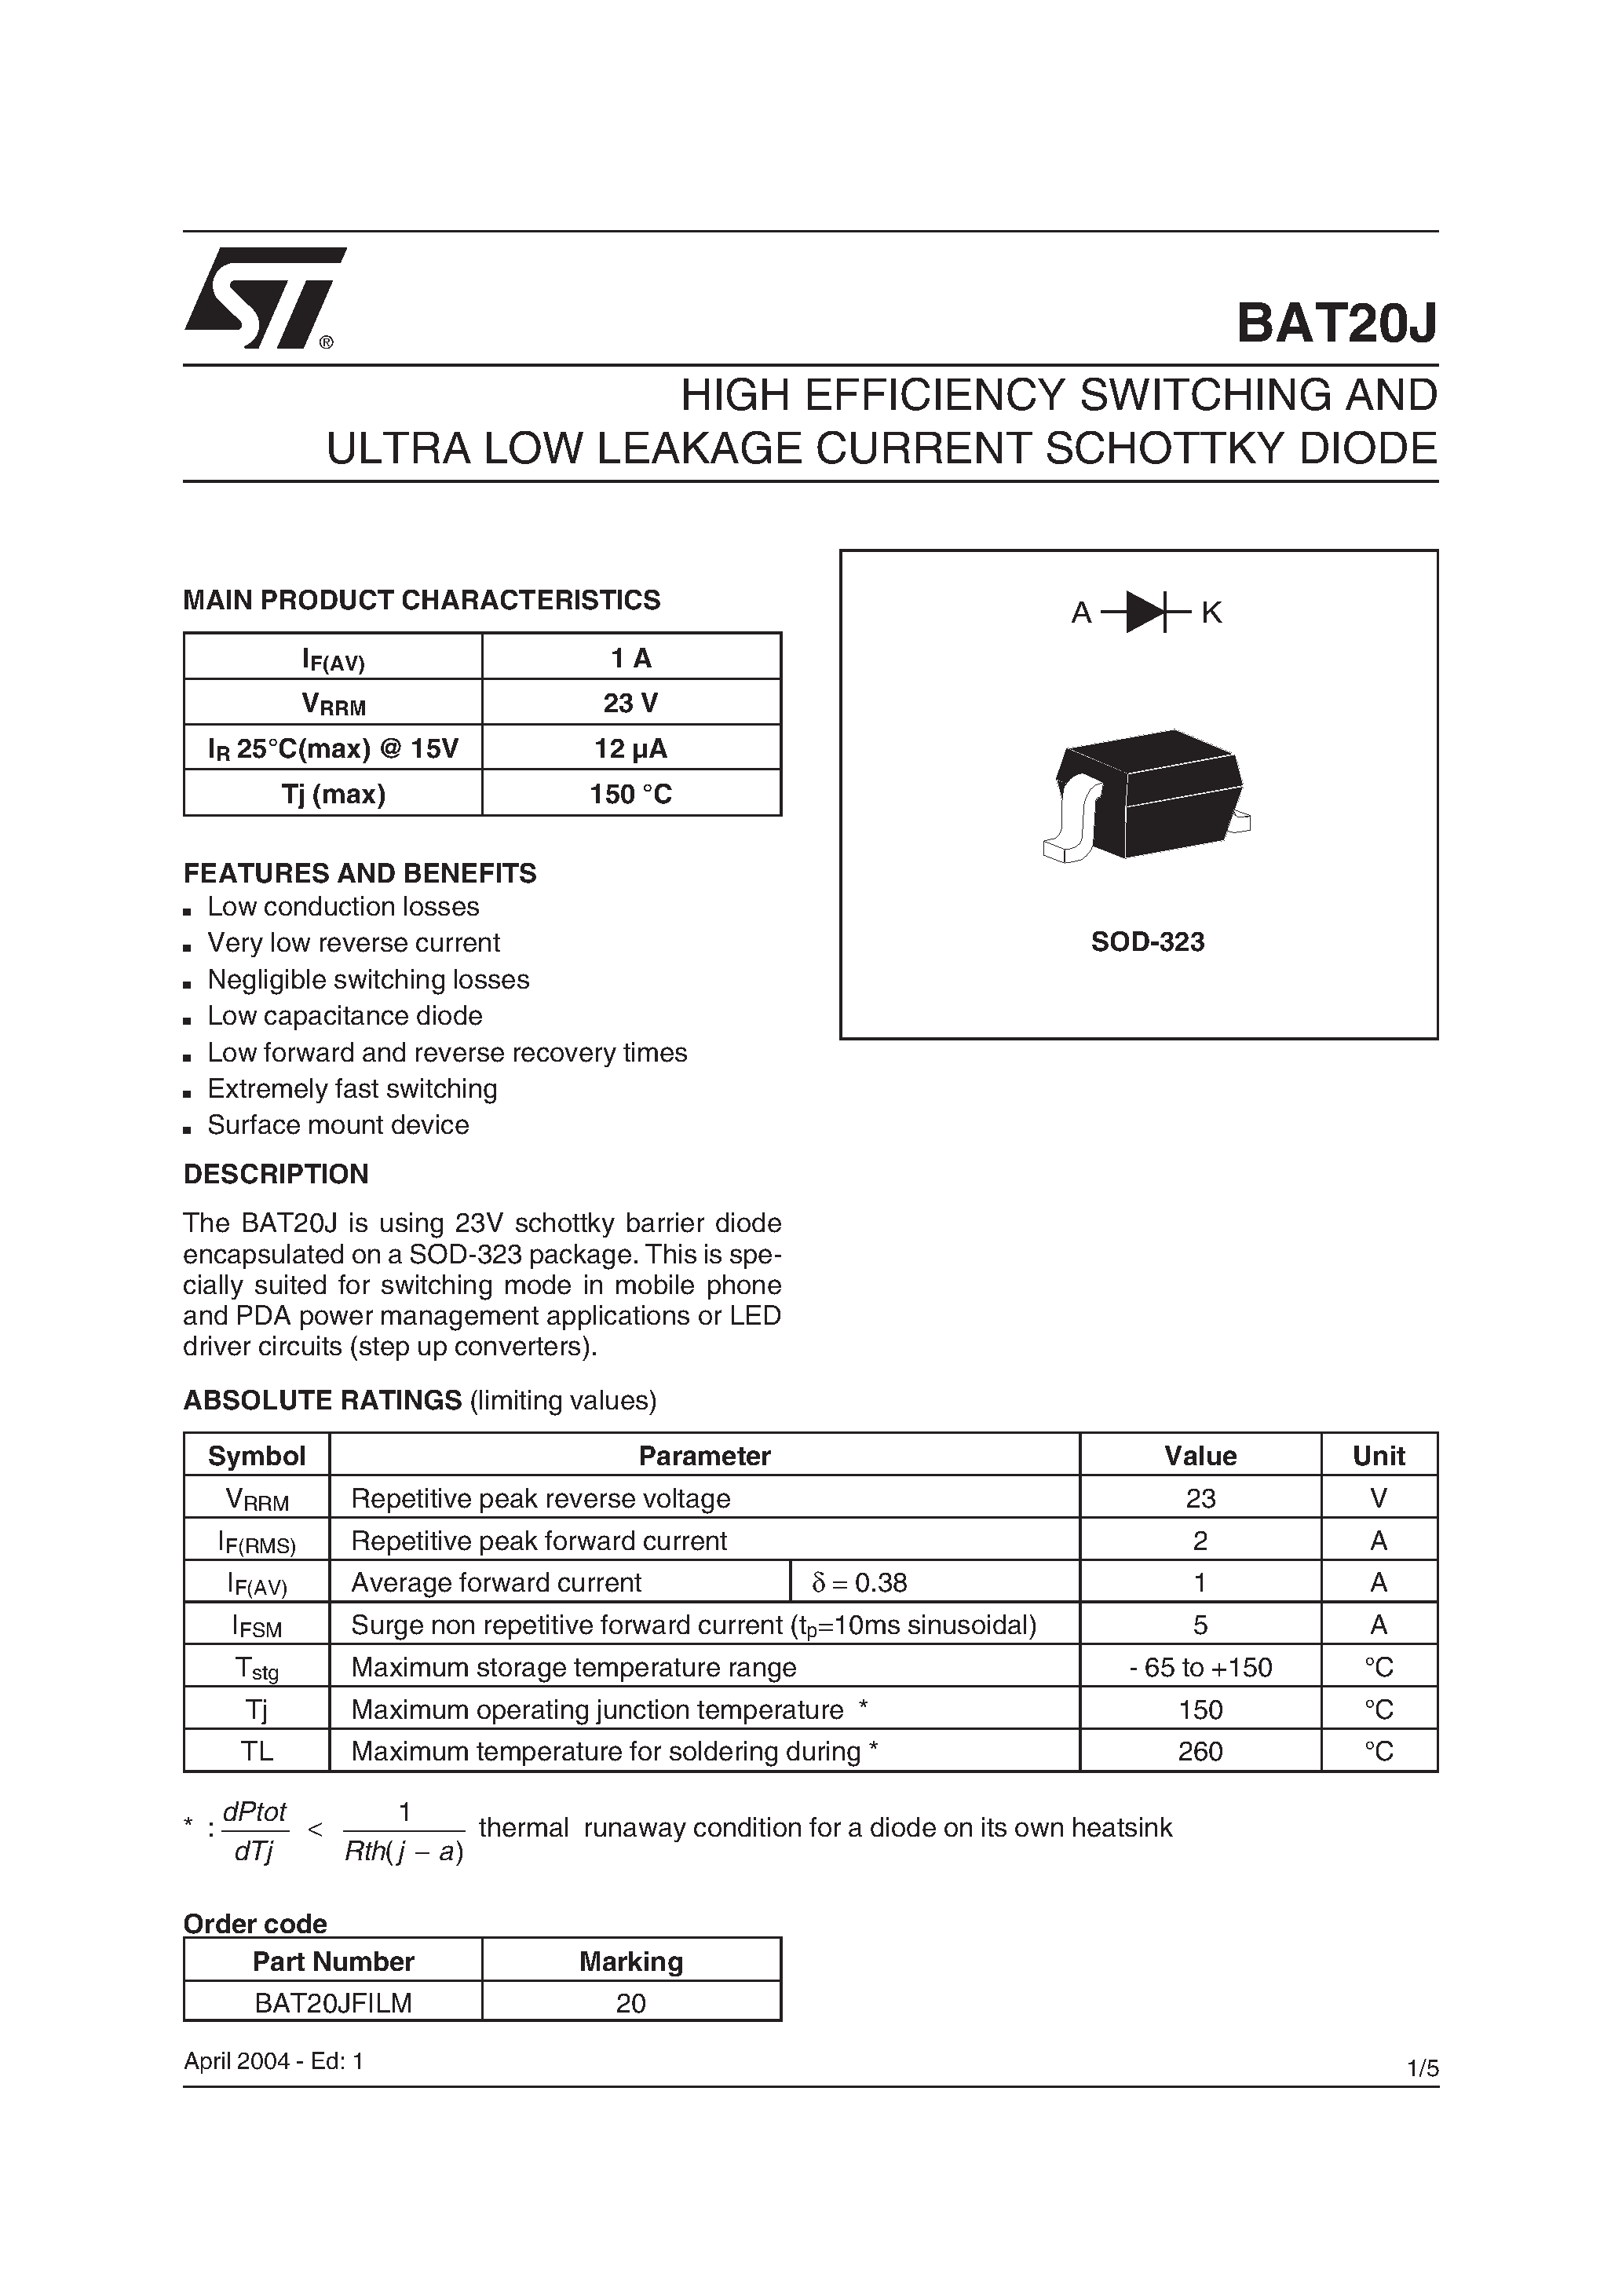 Datasheet BAT20JFILM - HIGH EFFICIENCY SWITCHING AND ULTRA LOW LEAKAGE CURRENT SCHOTTKY DIODE page 1